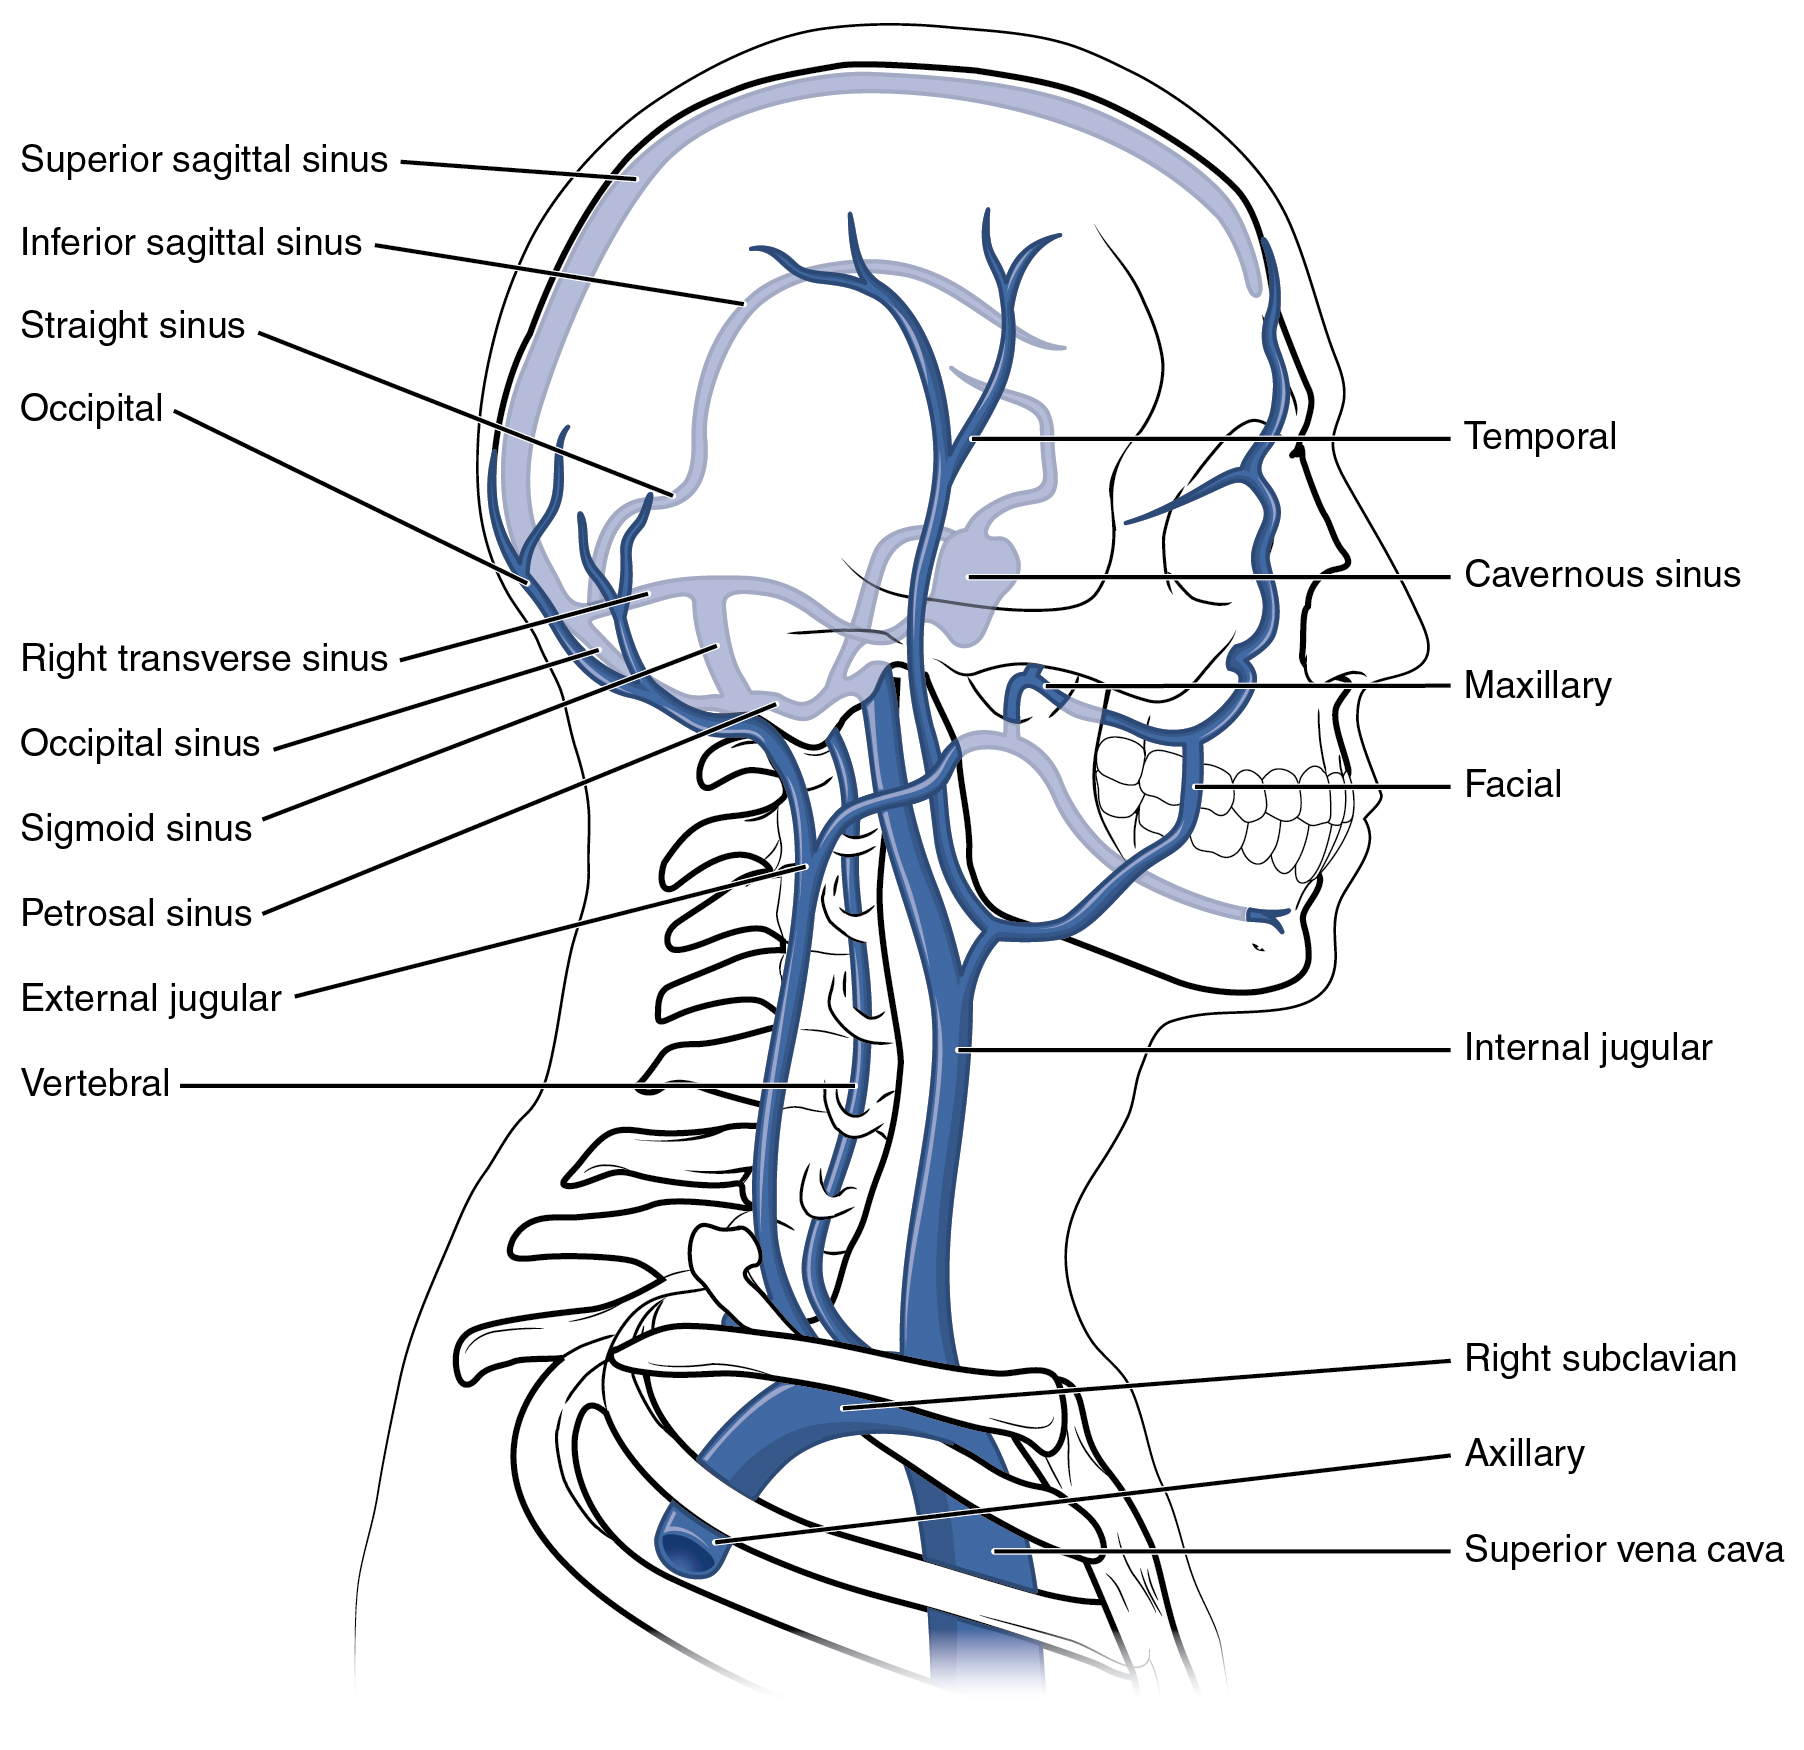 This diagram shows the veins present in the head and neck.